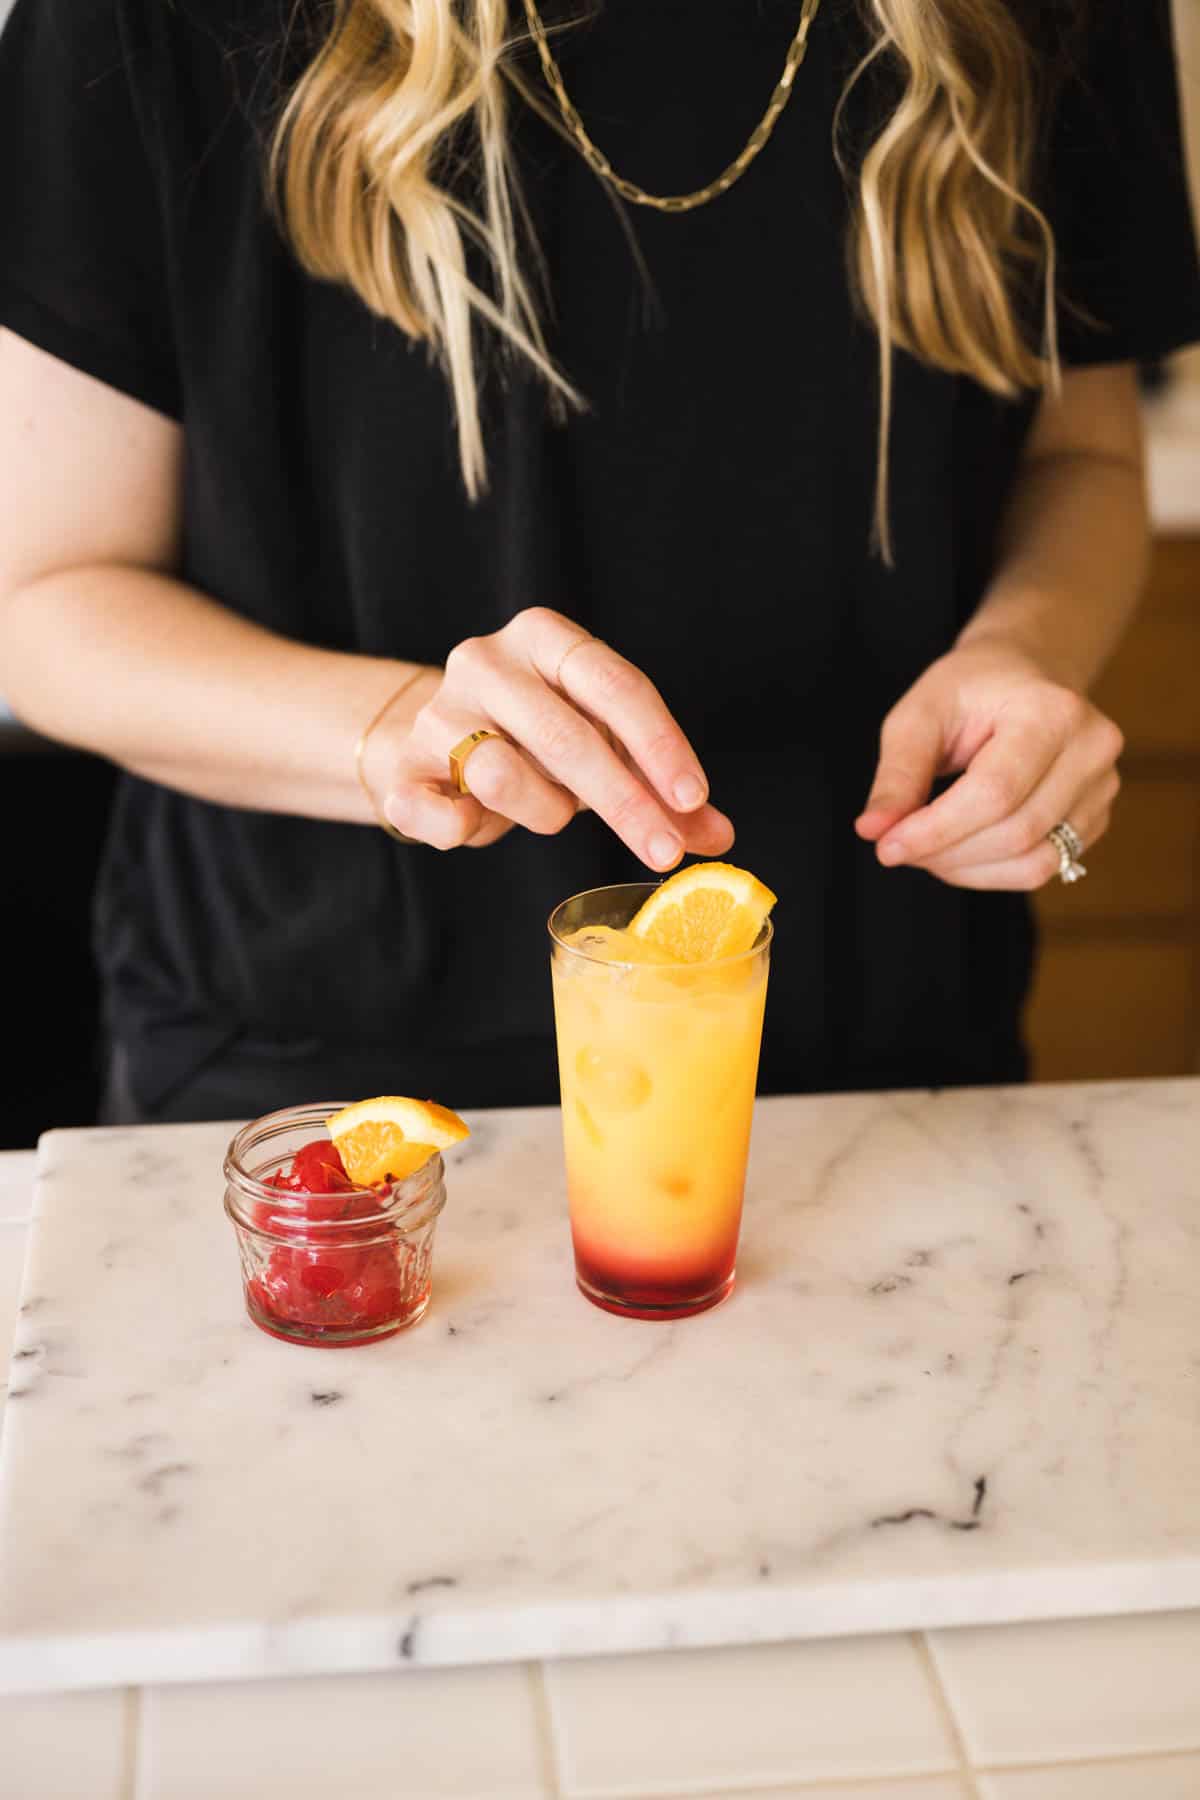 Woman adding a cherry and piece of orange to a finished Tequila Sunrise recipe.